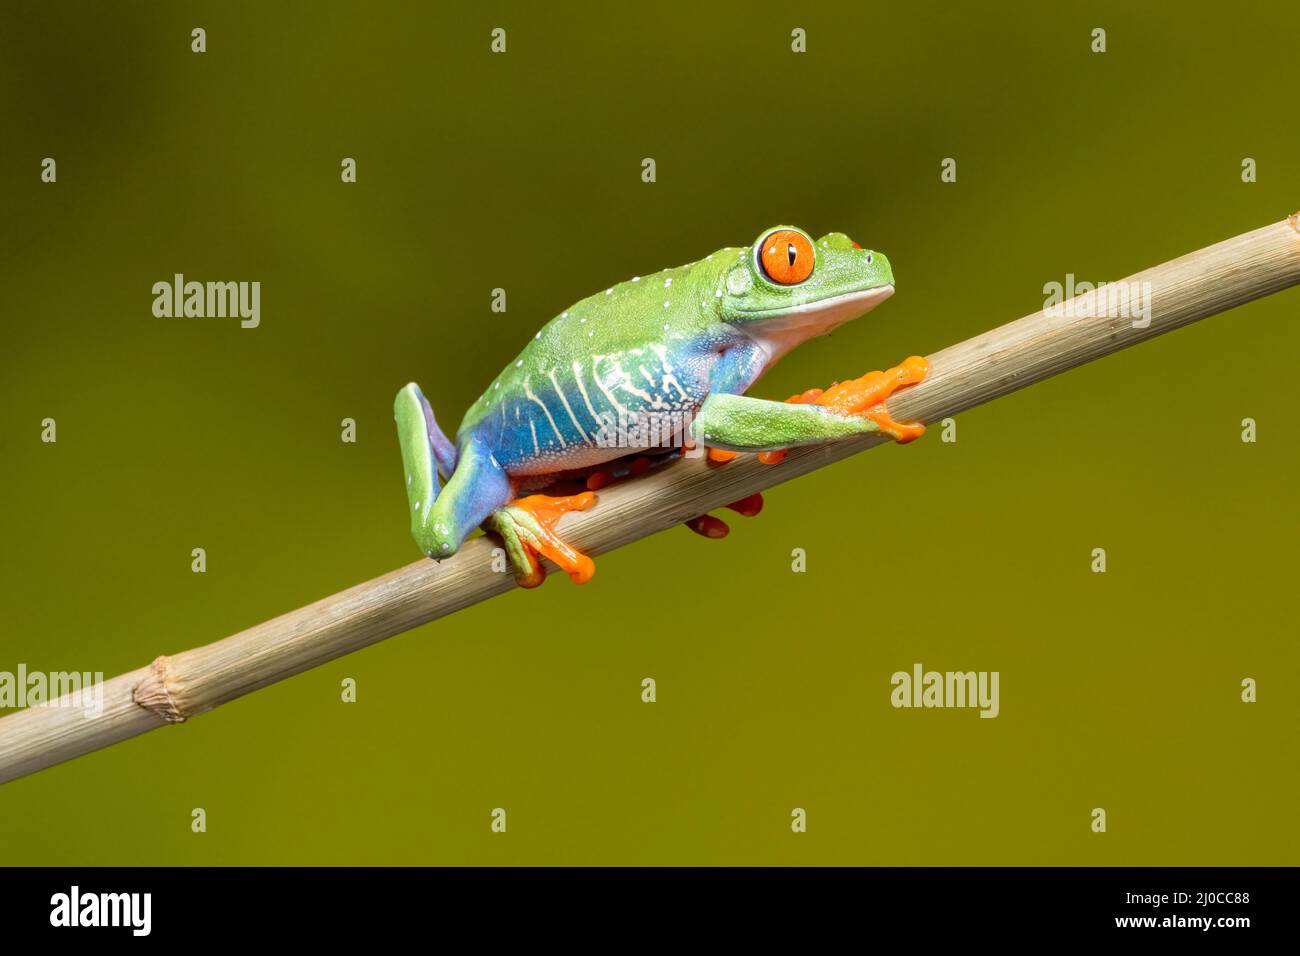 Red Eyed Tree Frog (Agalychnis callidryas), clambering up a plant stem Stock Photo